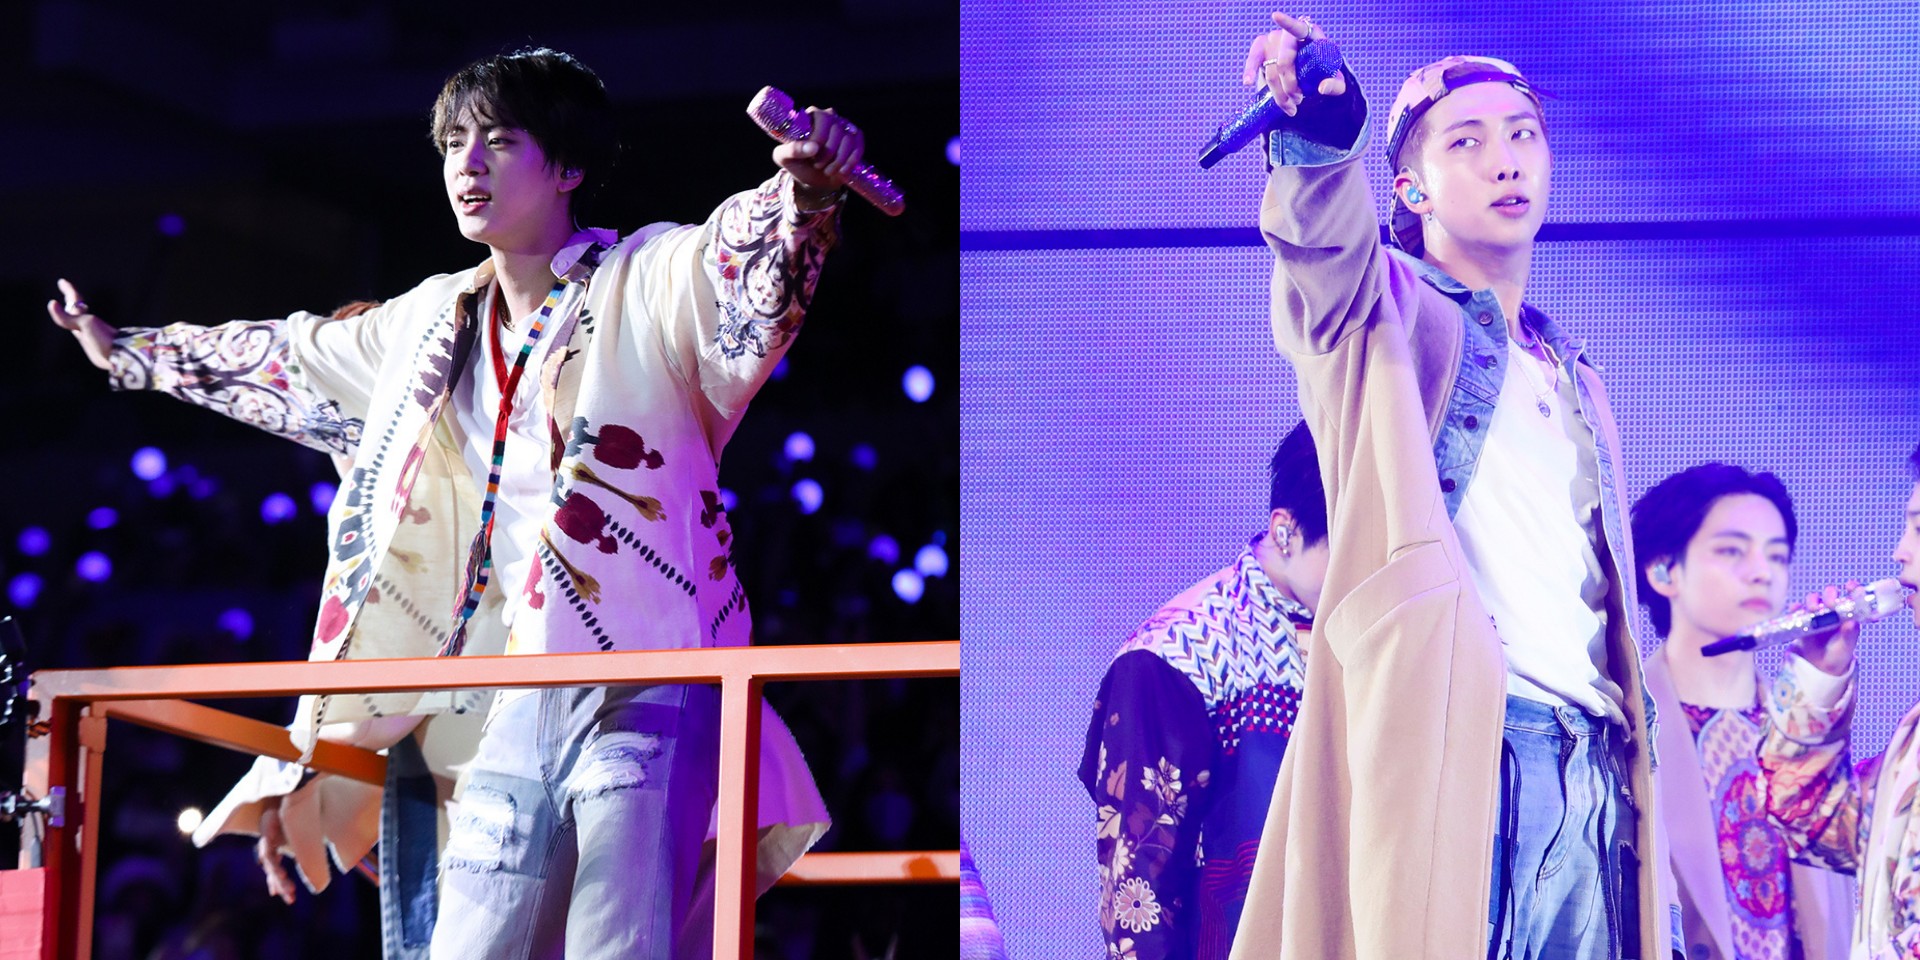 BTS' Jin and RM make full recovery from COVID-19, BigHit Music confirms 